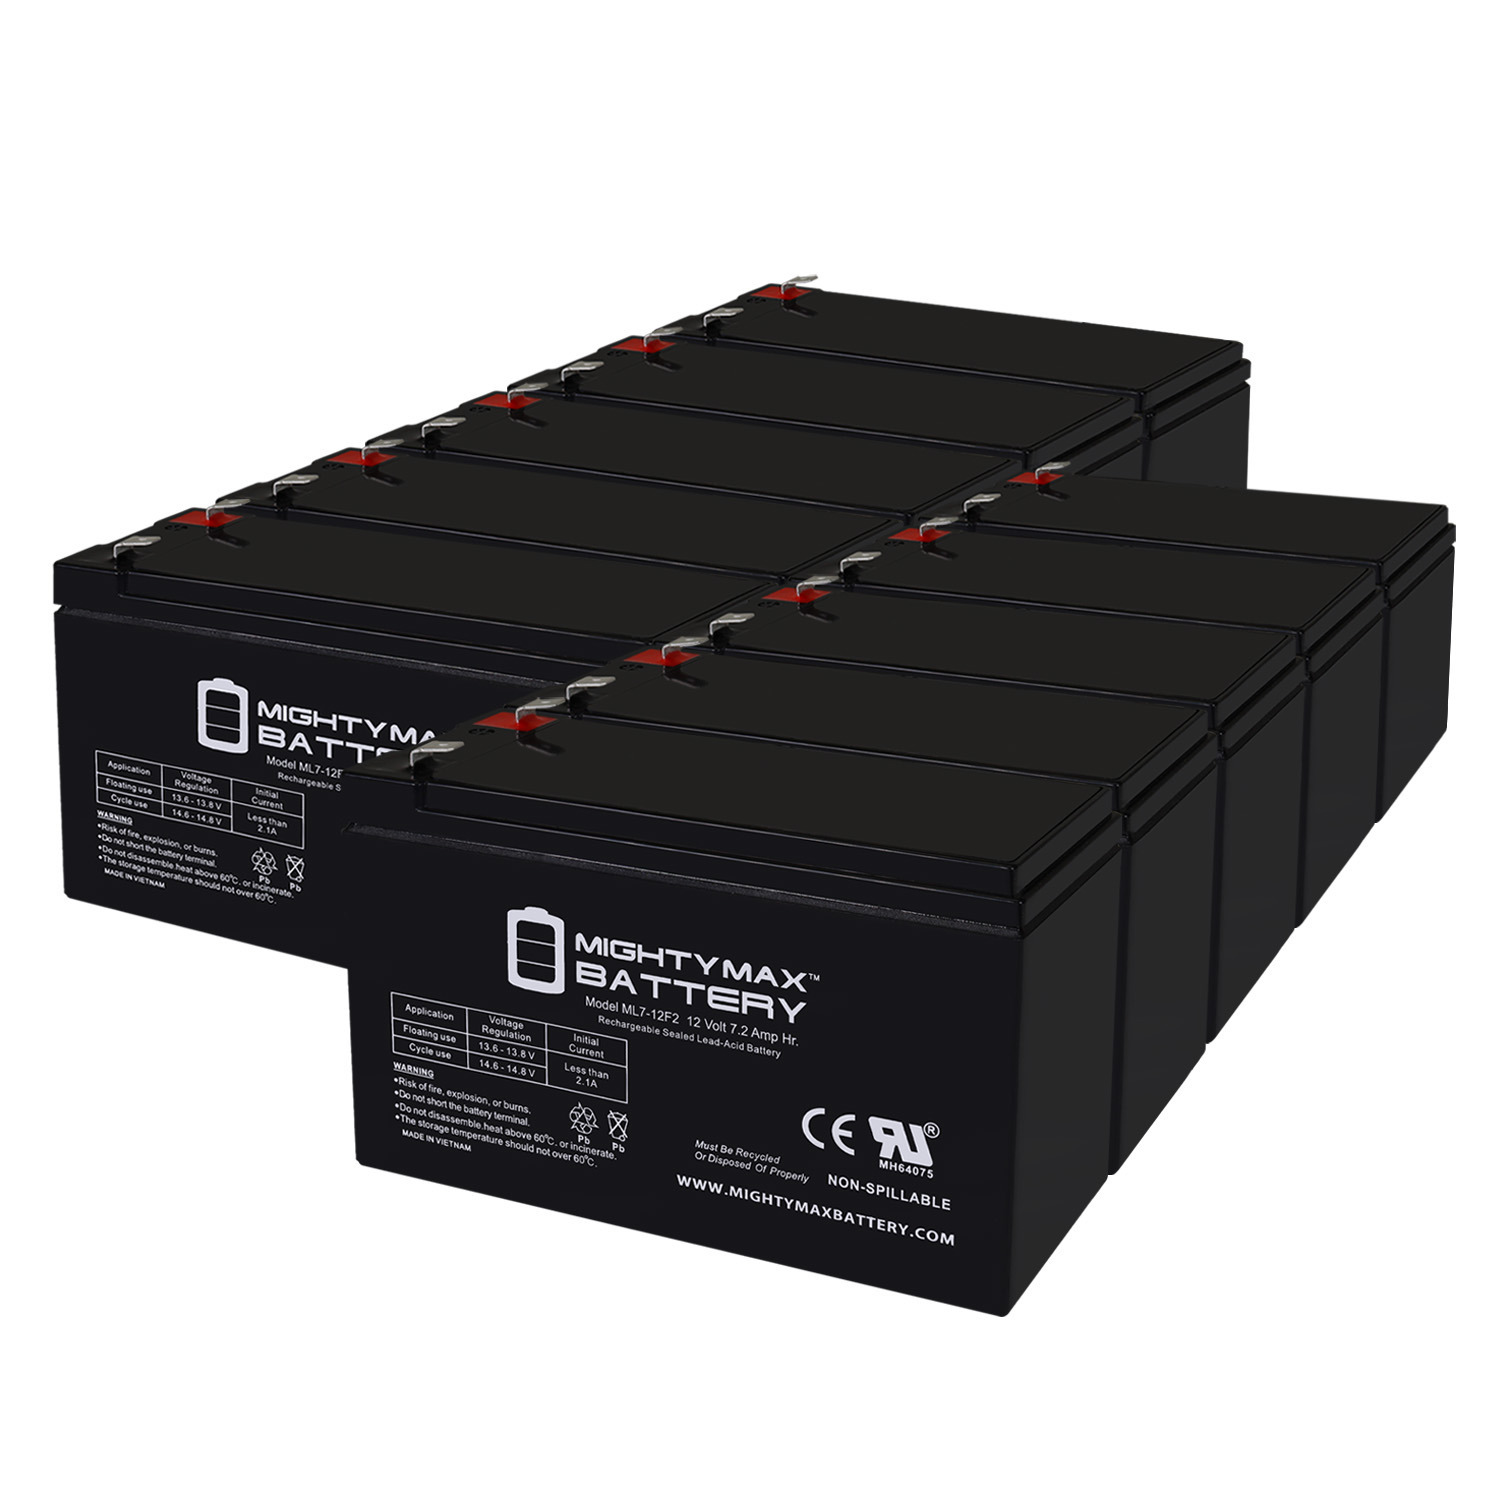 12V 7Ah F2 Battery Replaces Enersys Genesis 150 Scooter Moped GY6 - 10 Pack